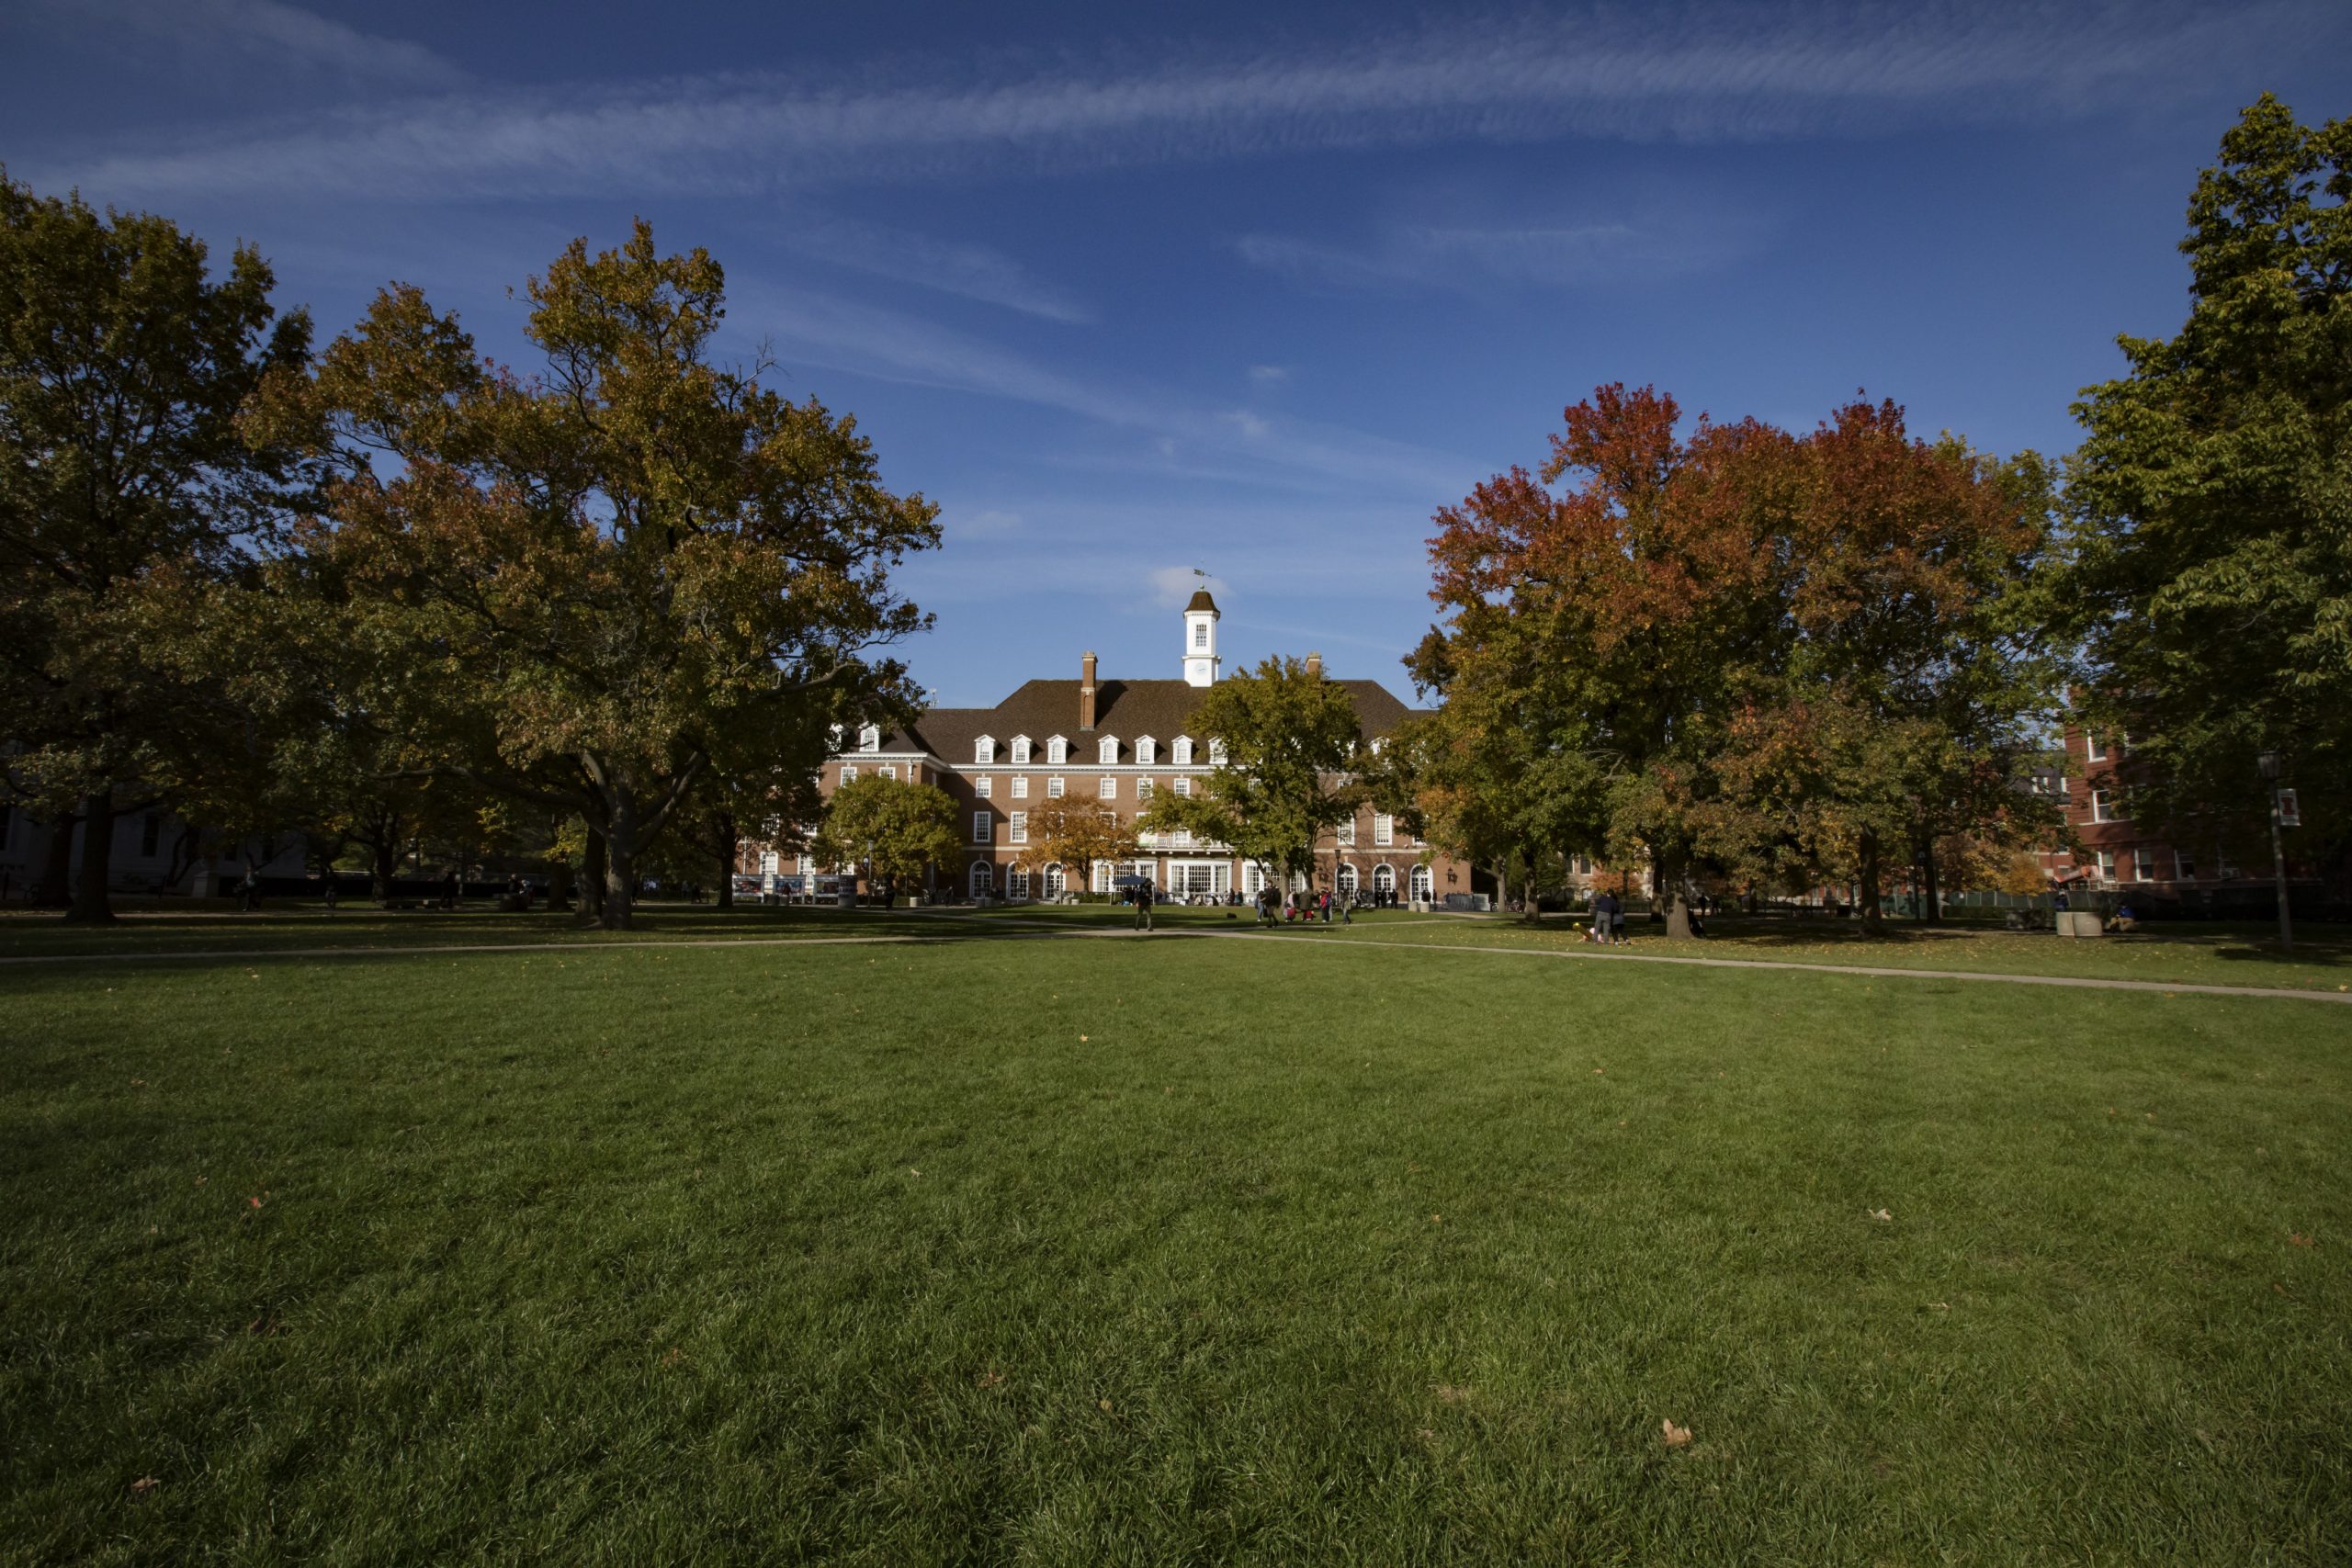 The Illini Union on a fall afternoon.